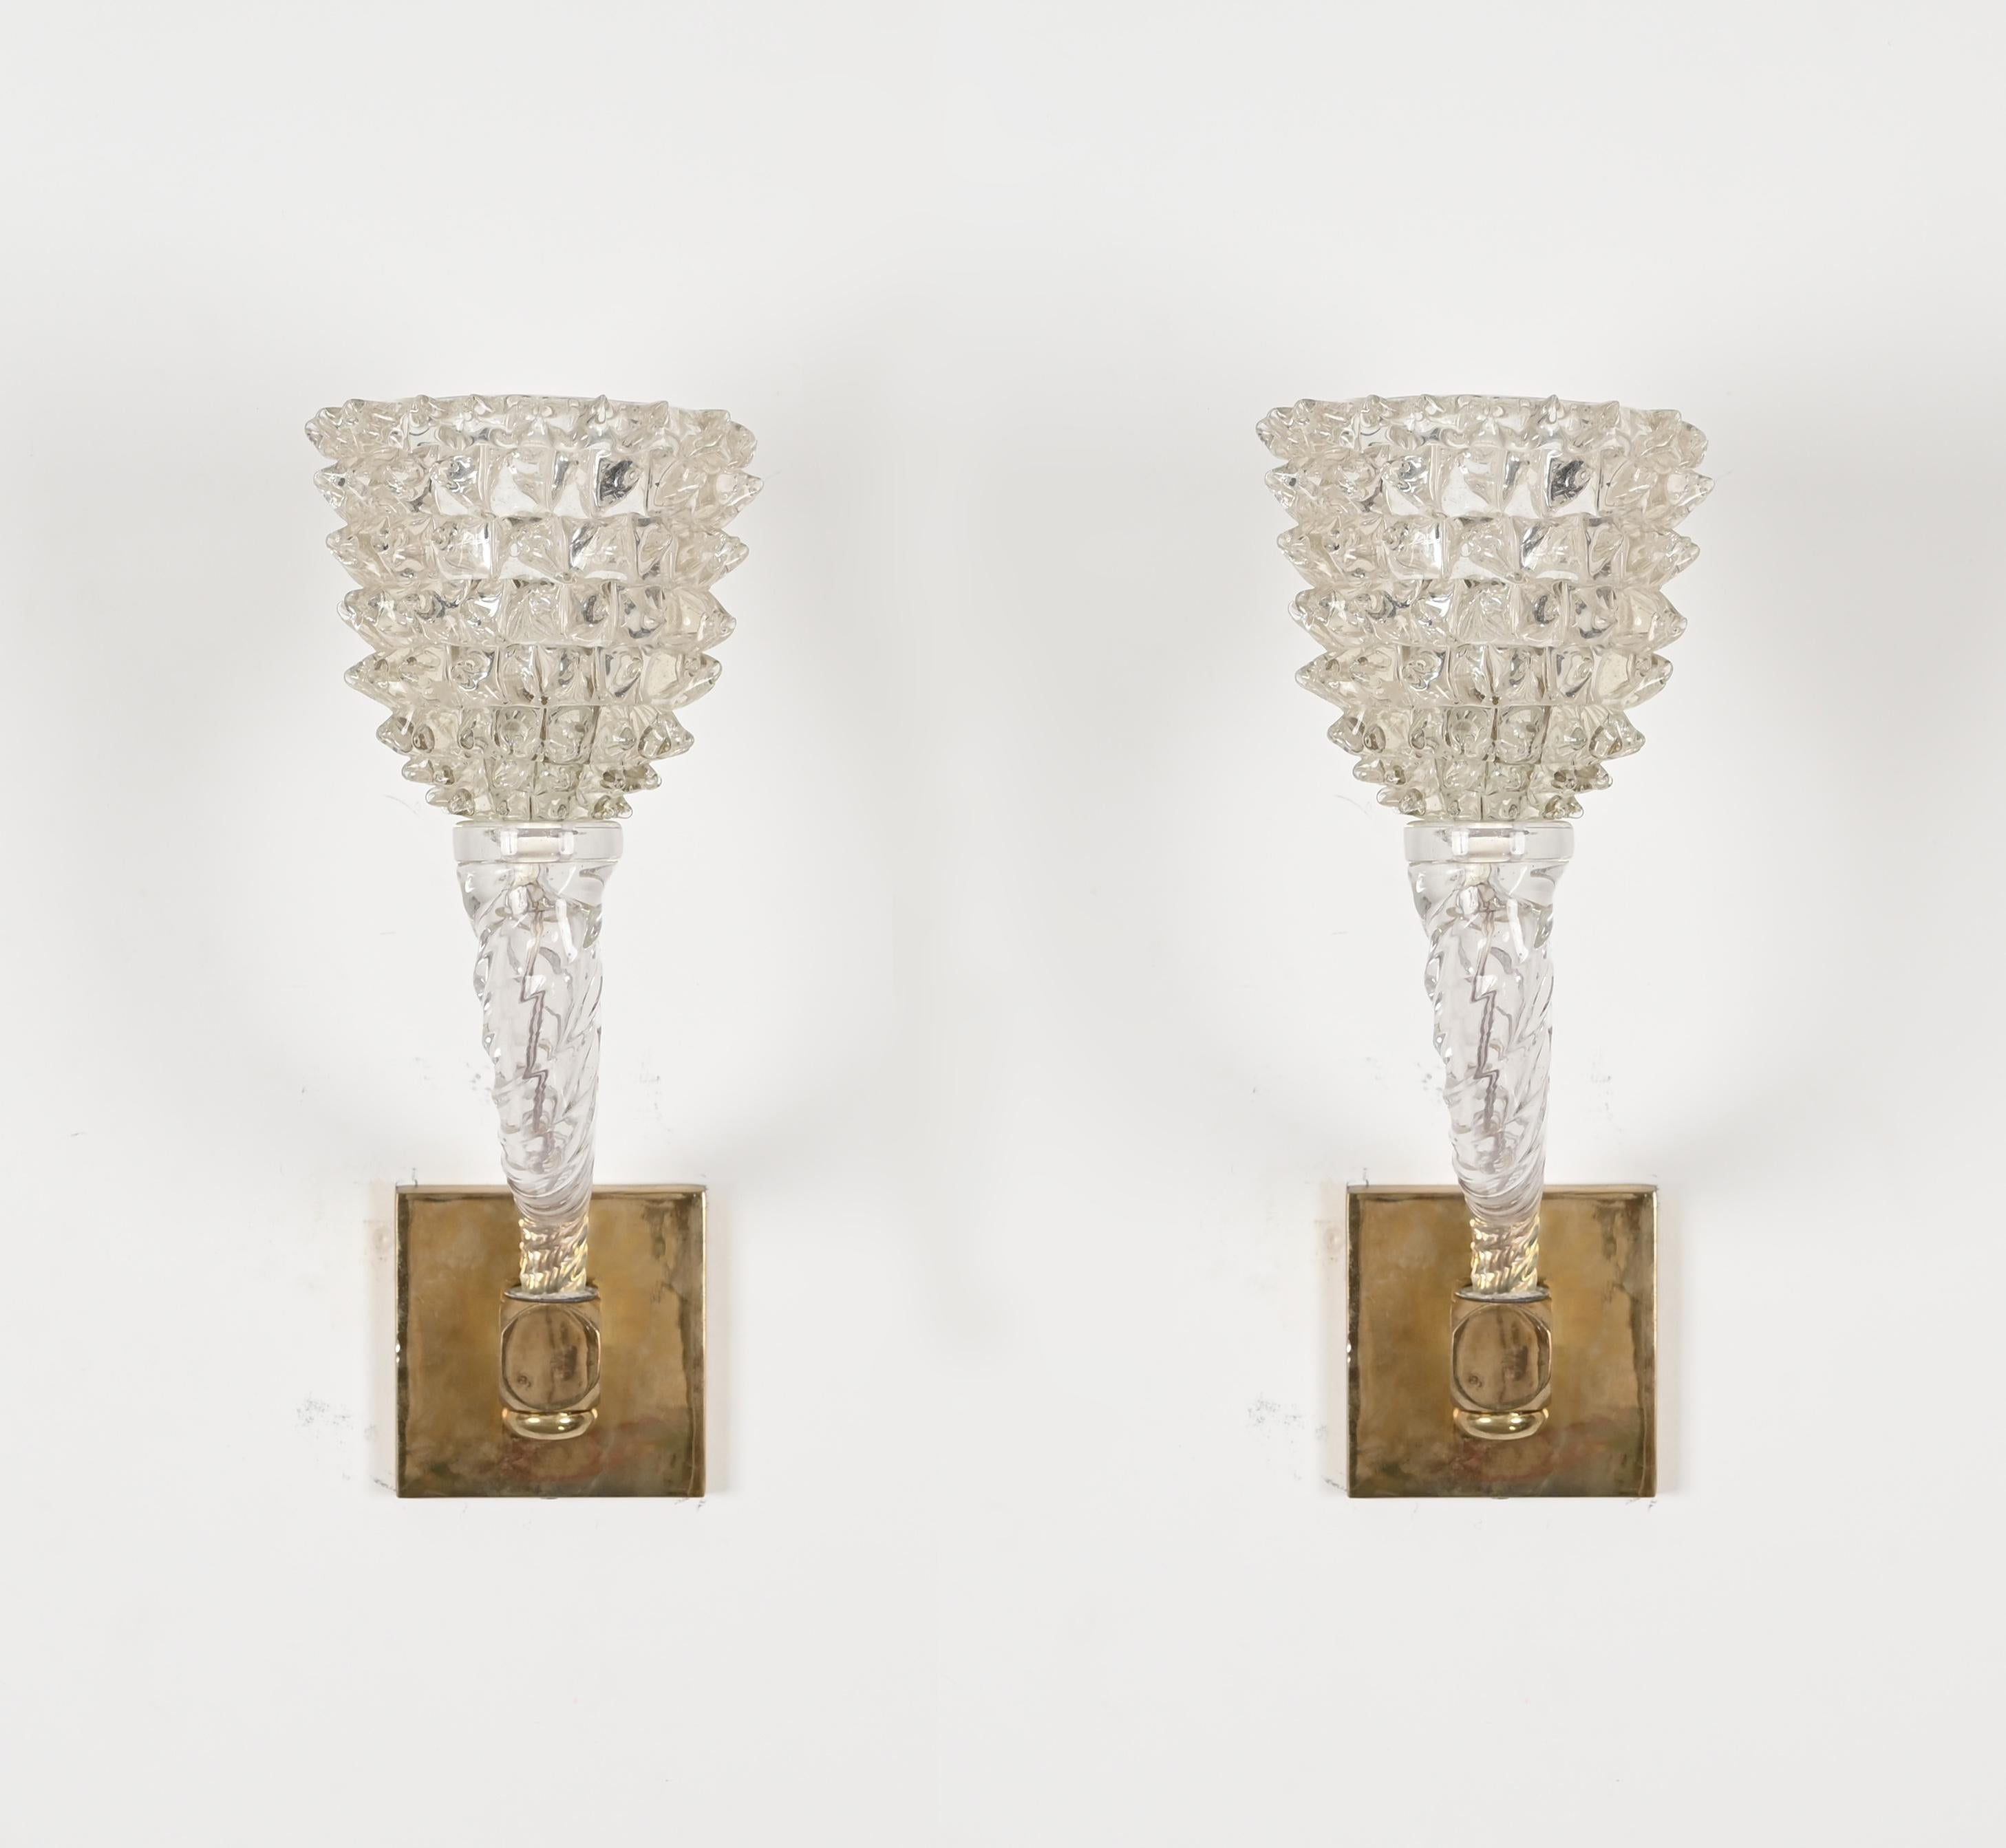 Pair of Barovier Murano Rostrato Twisted Glass and Brass Sconces, Italy 1950s For Sale 6